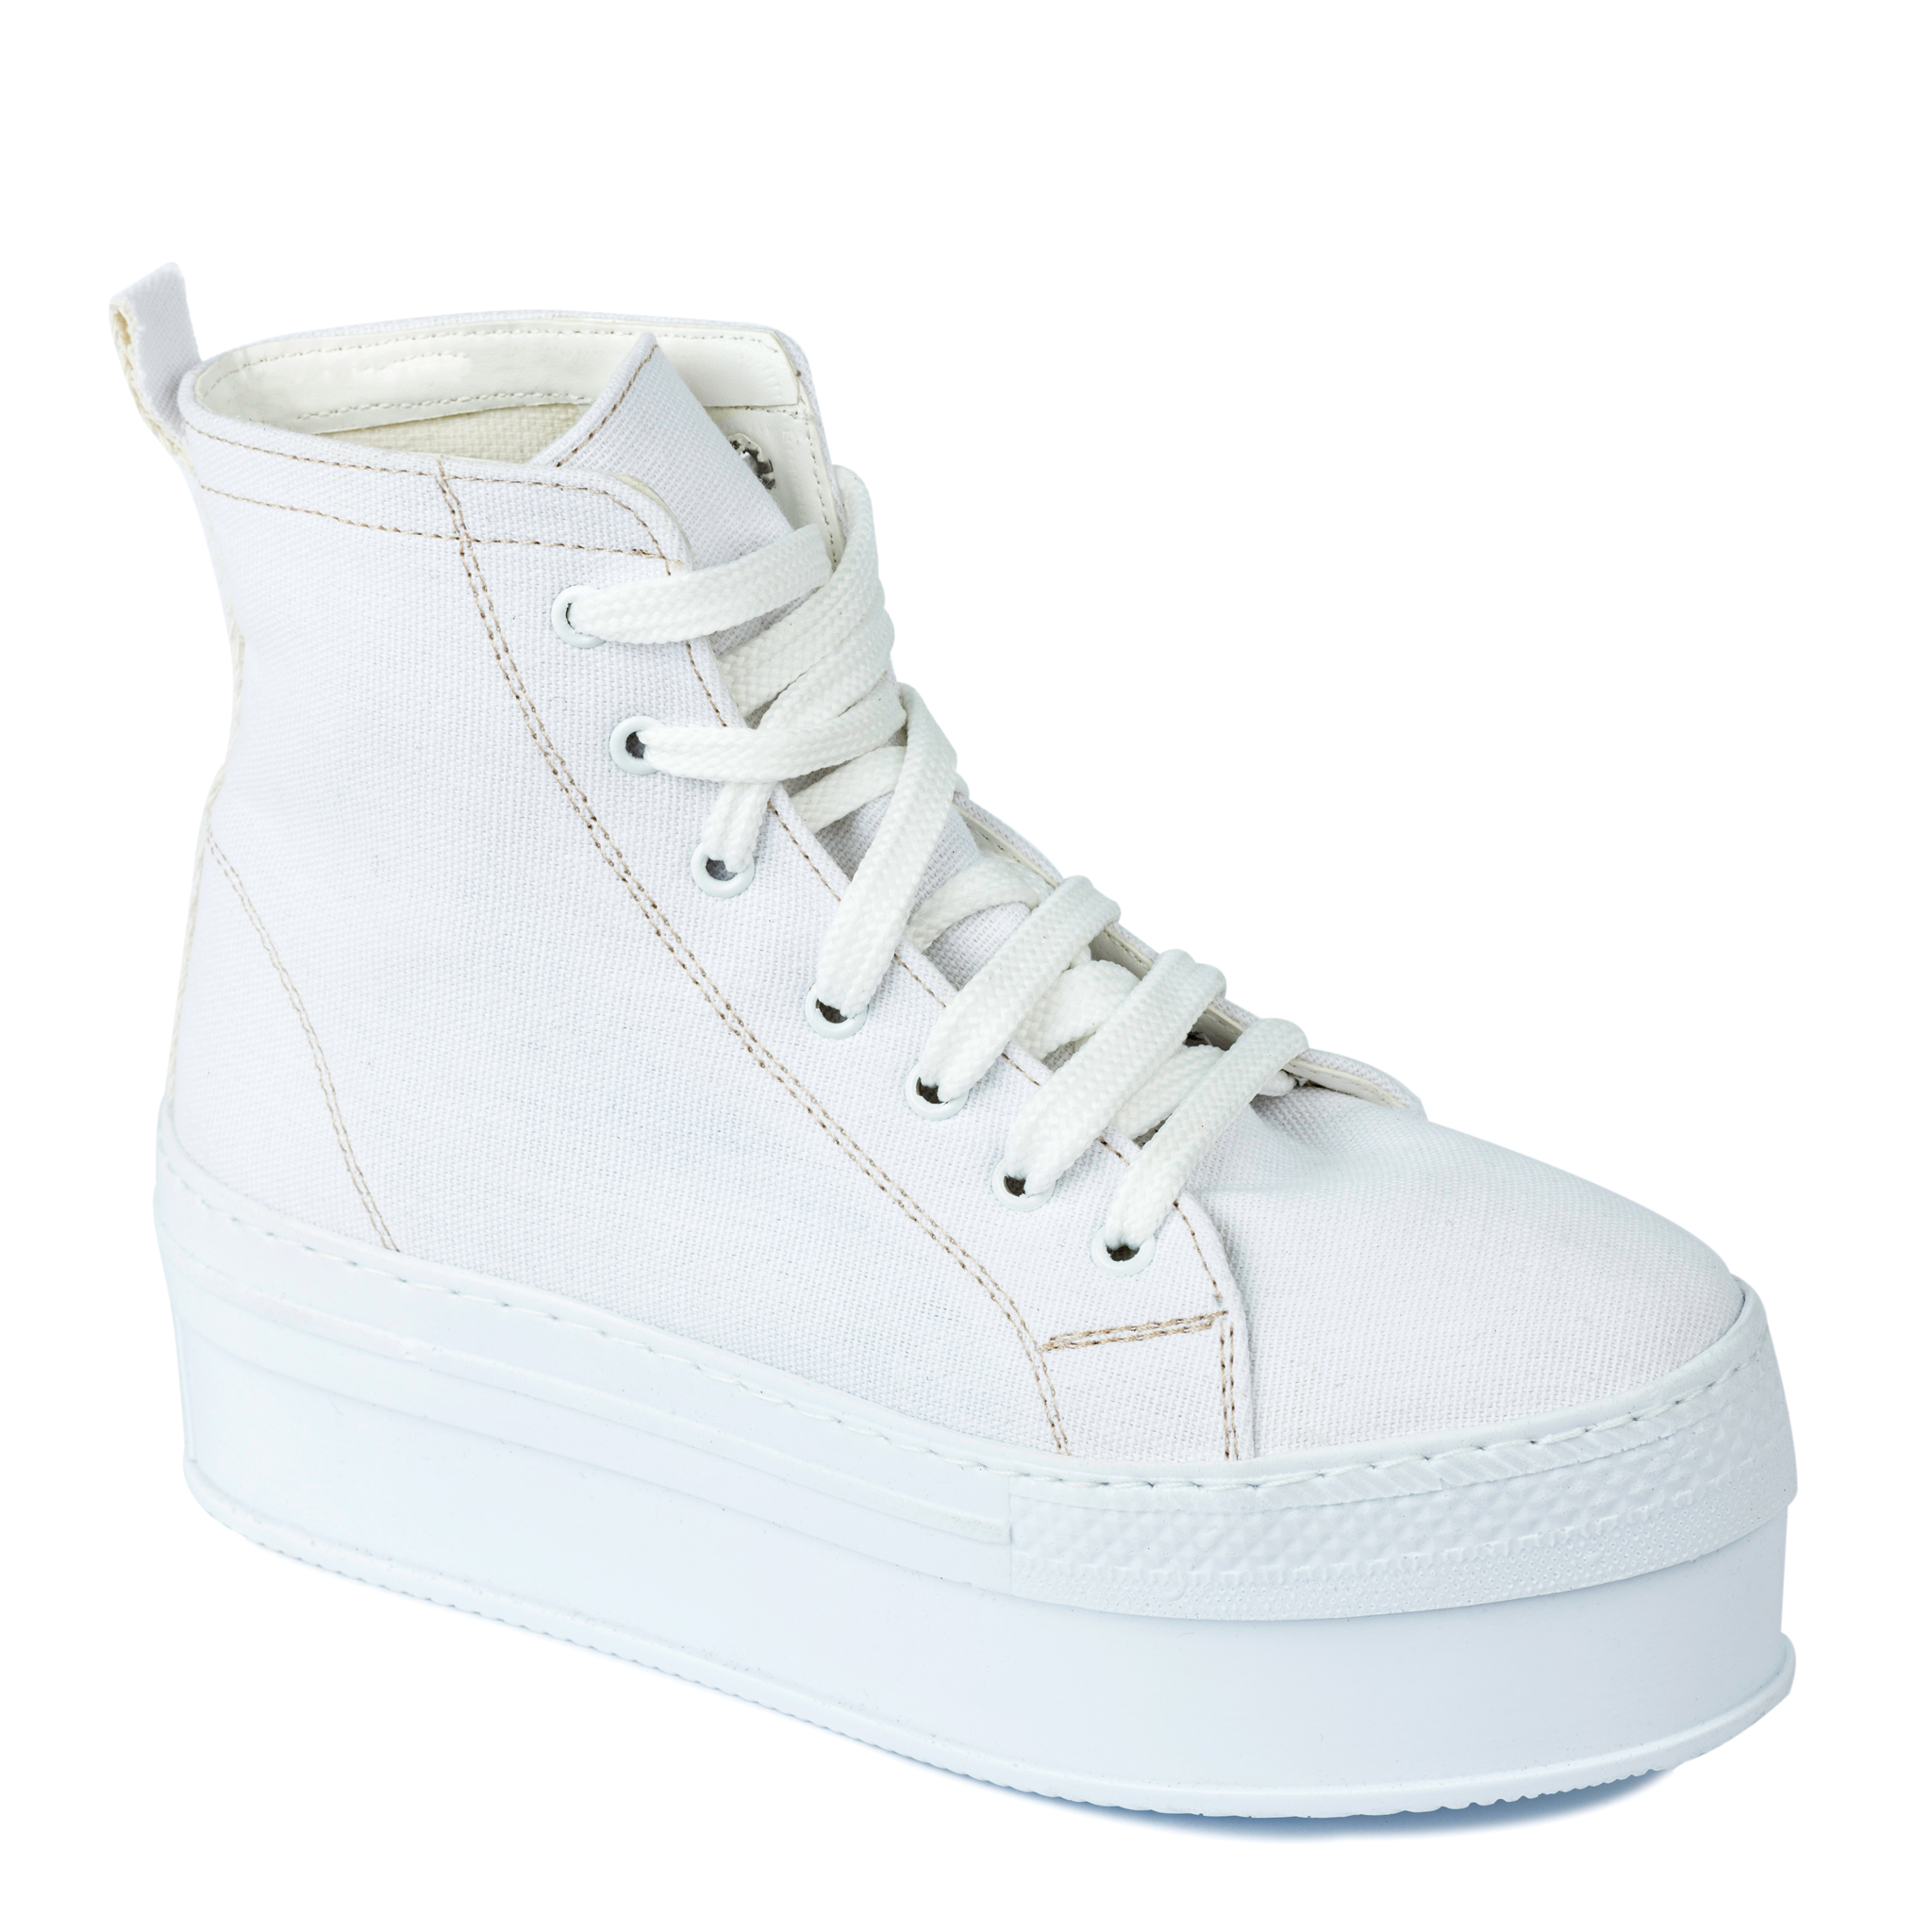 HIGH SOLE ANKLE SNEAKERS - WHITE